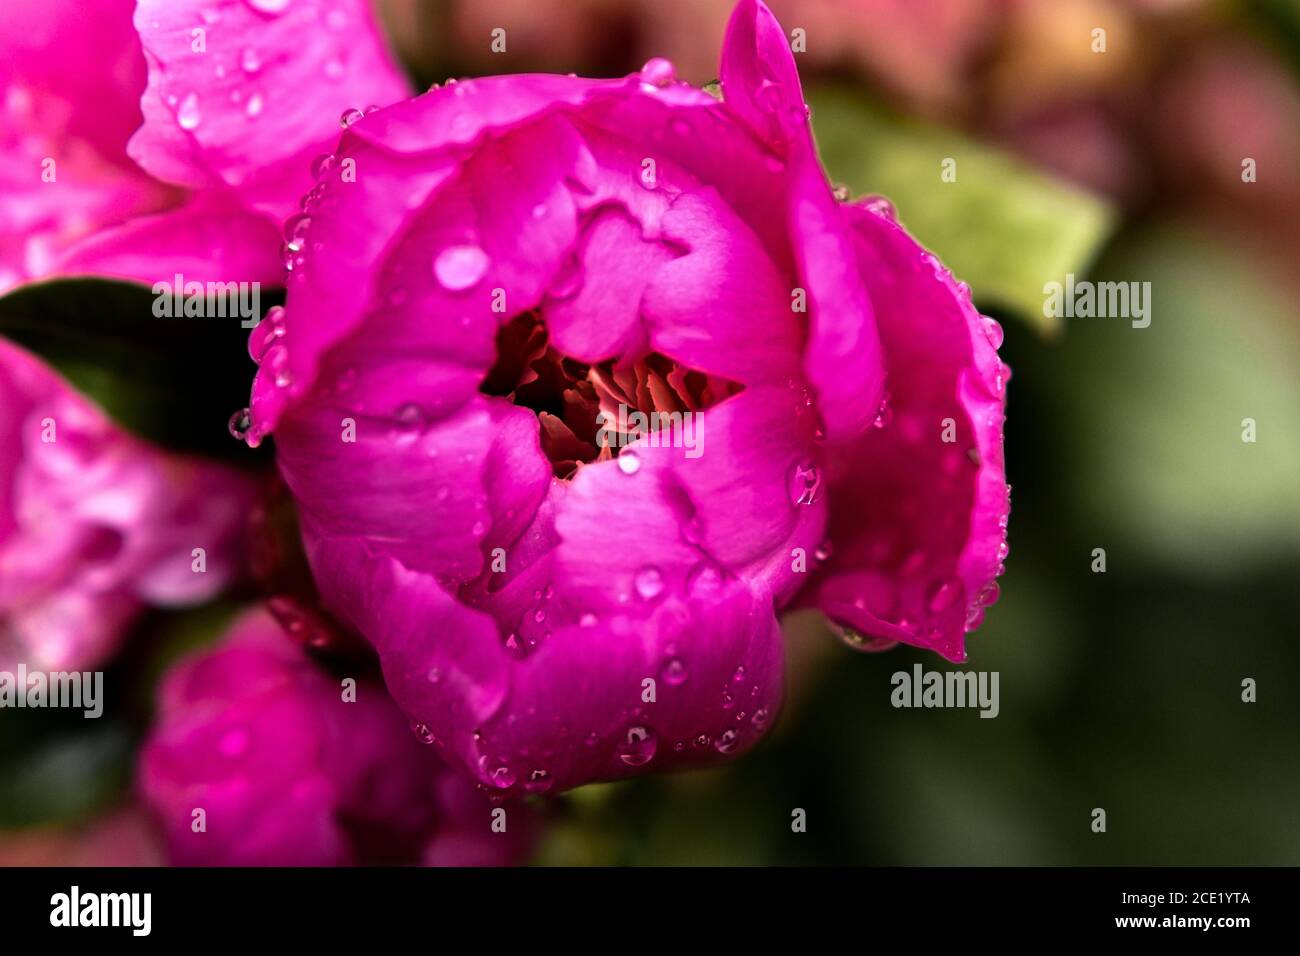 Peony flower closeup isolated. Pink peony flower in the garden after rain, Petals of peony with raindrops. Peony flower background. Stock Photo